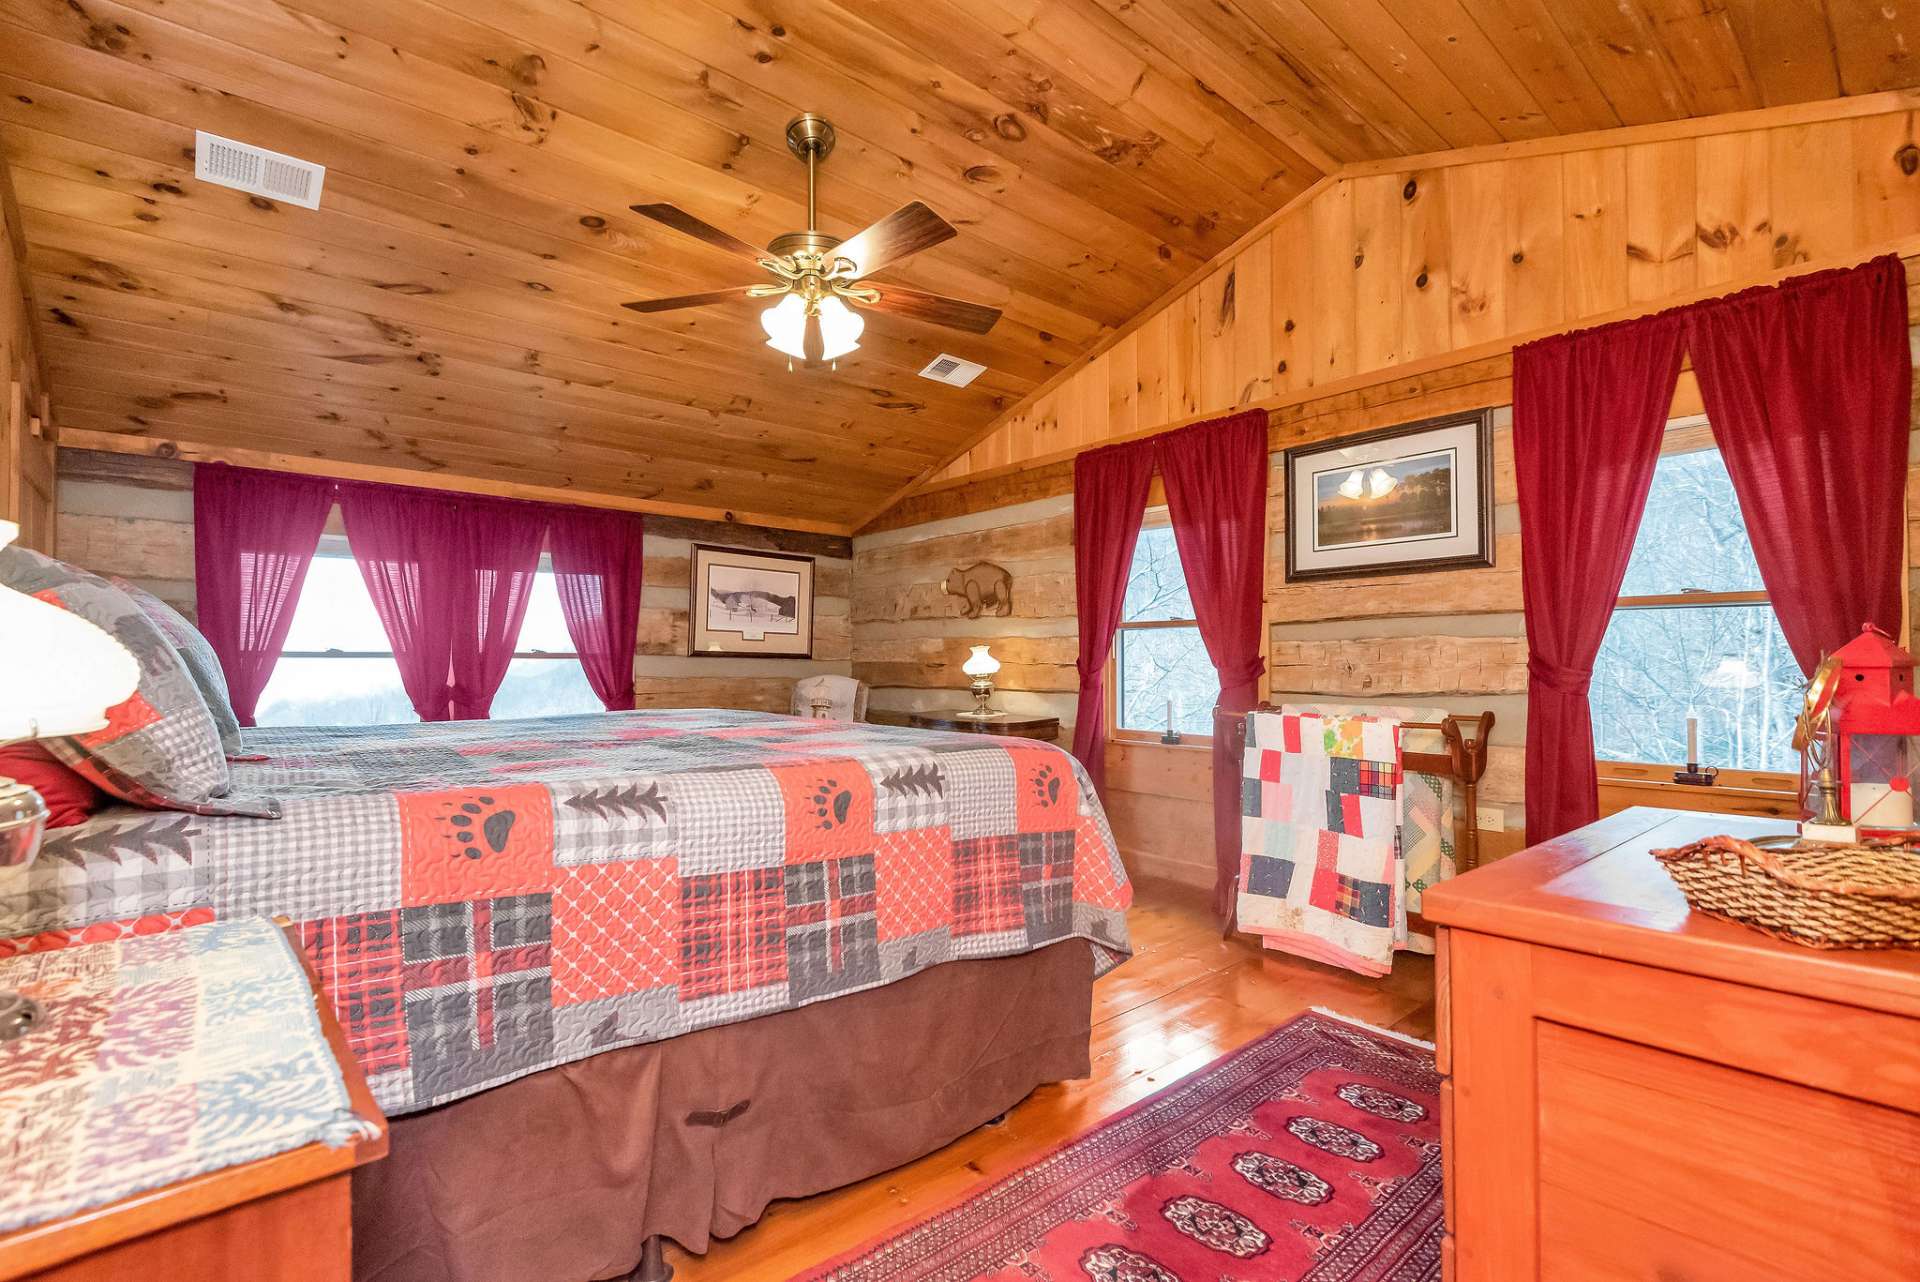 Additional guest room with vaulted ceilings, views, and natural light.